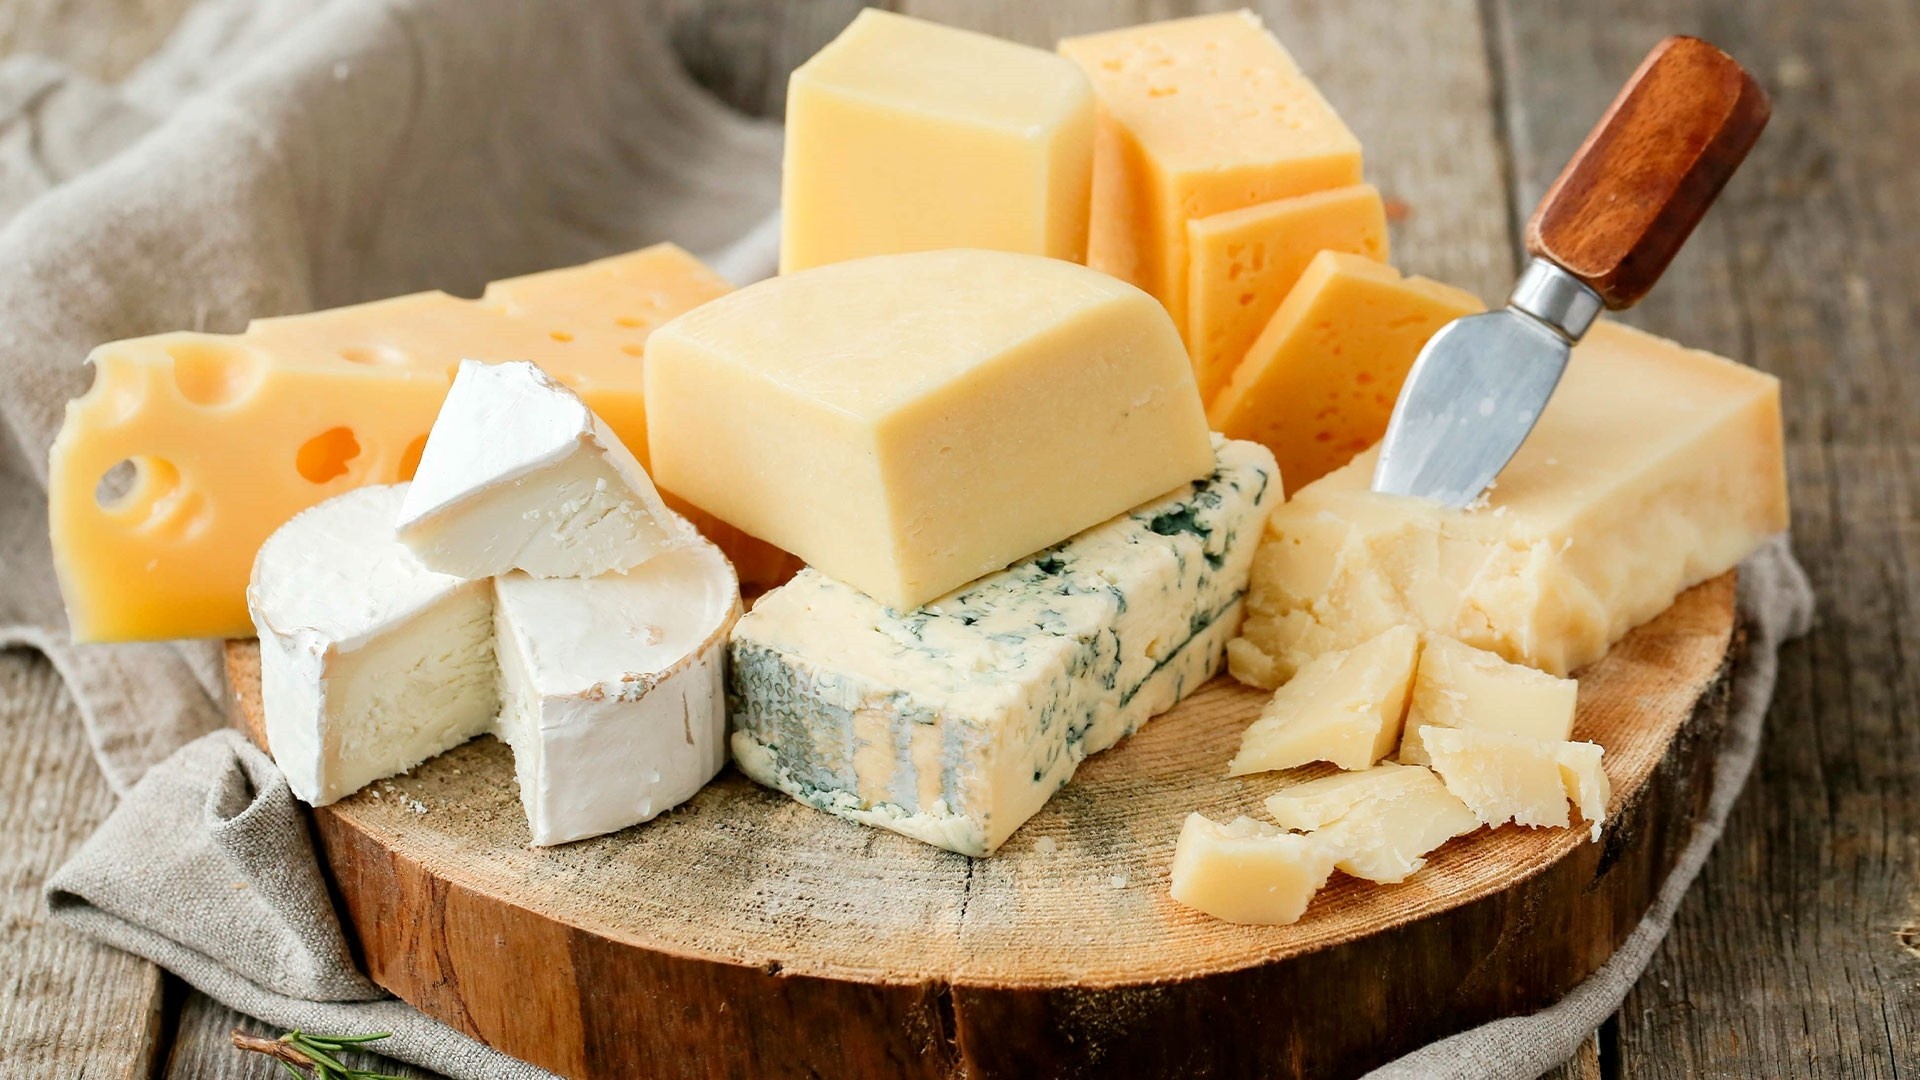 Cheese: Feta is made from sheep's milk and is commonly used in Mediterranean cuisine. 1920x1080 Full HD Background.